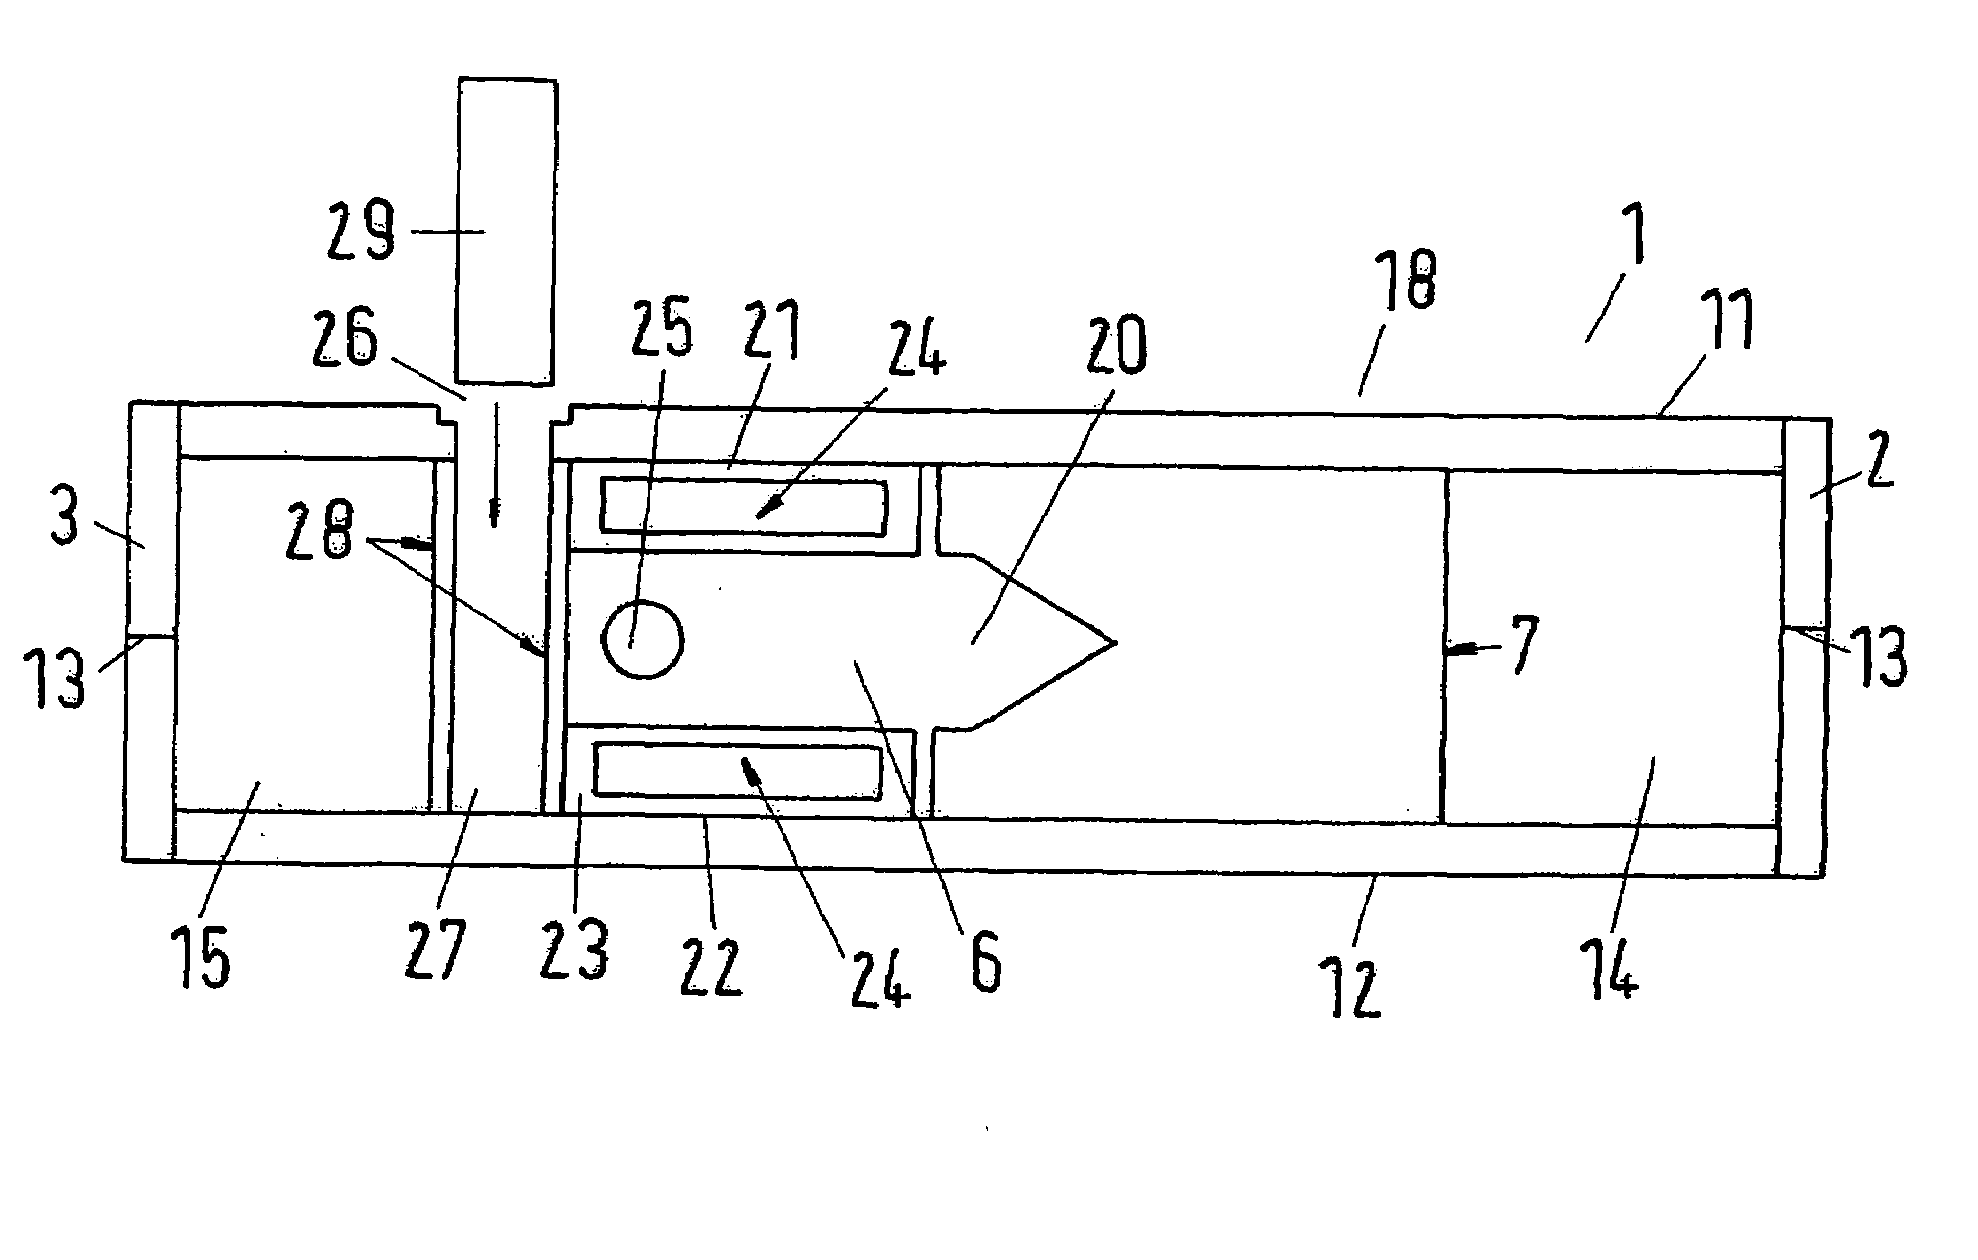 Electrical service switching device with an arc blowout device